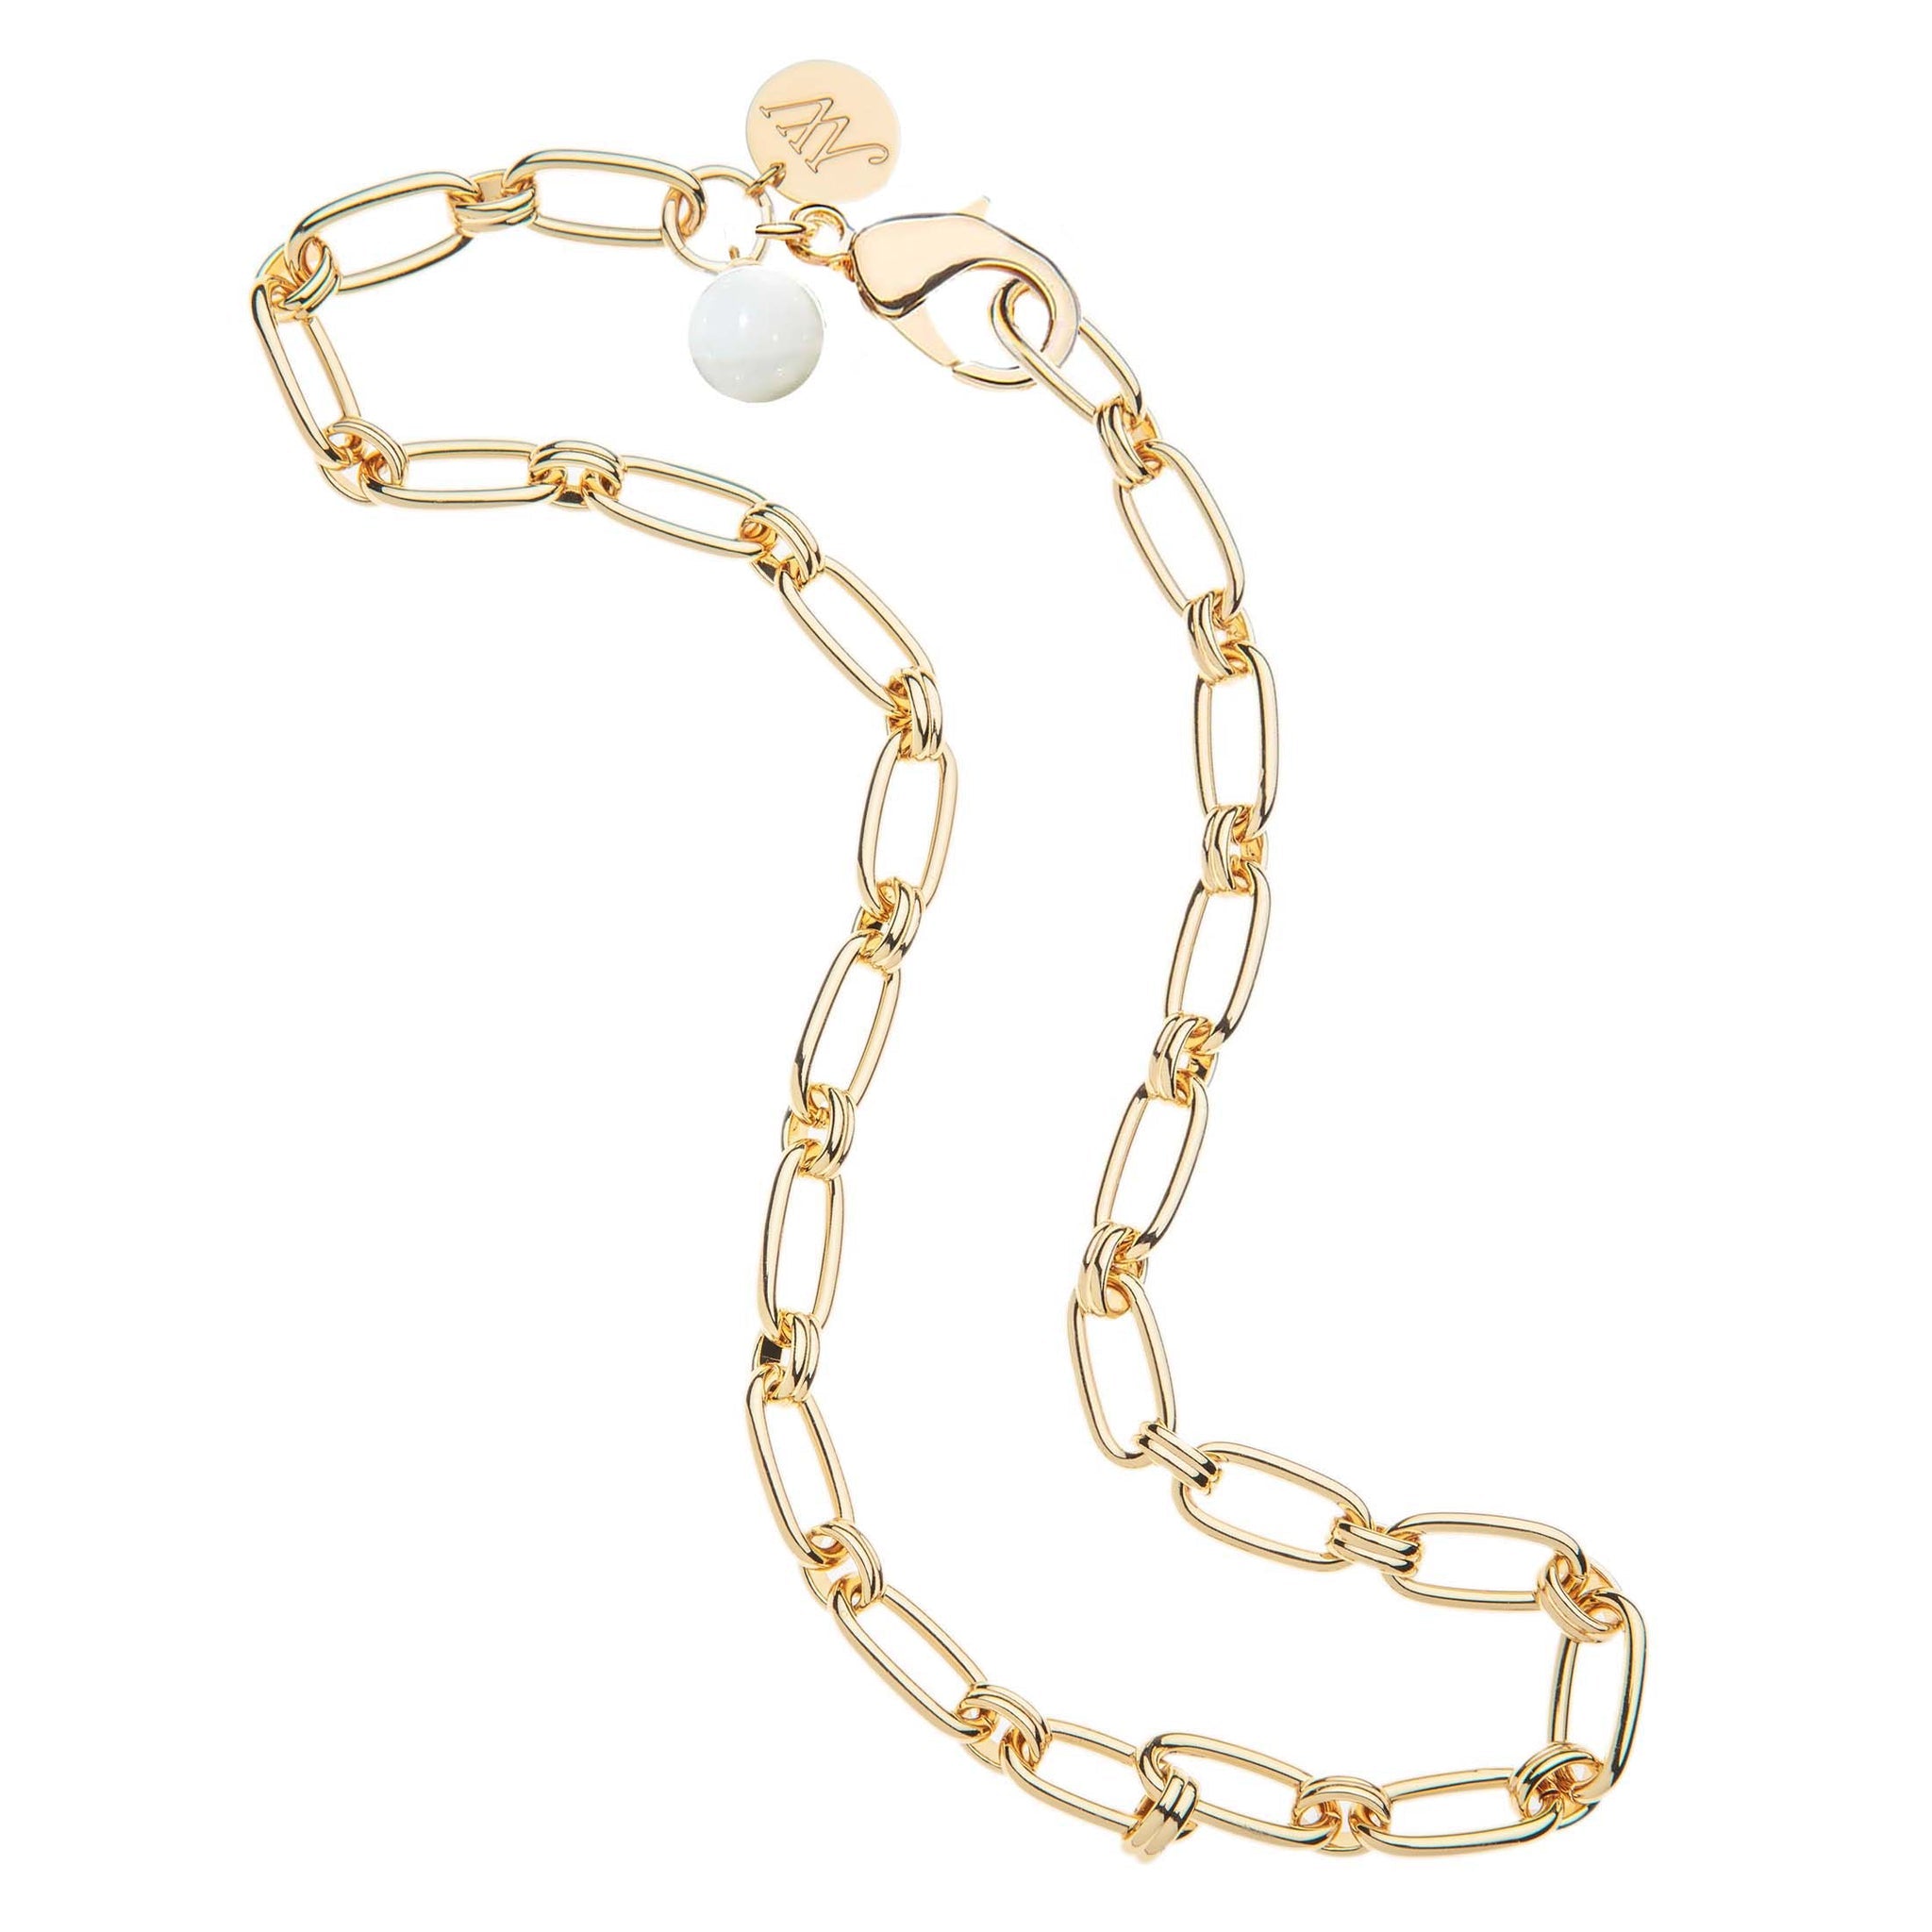 Jane Win - Wheels of Fortune Chain with Mother of Pearl Bead